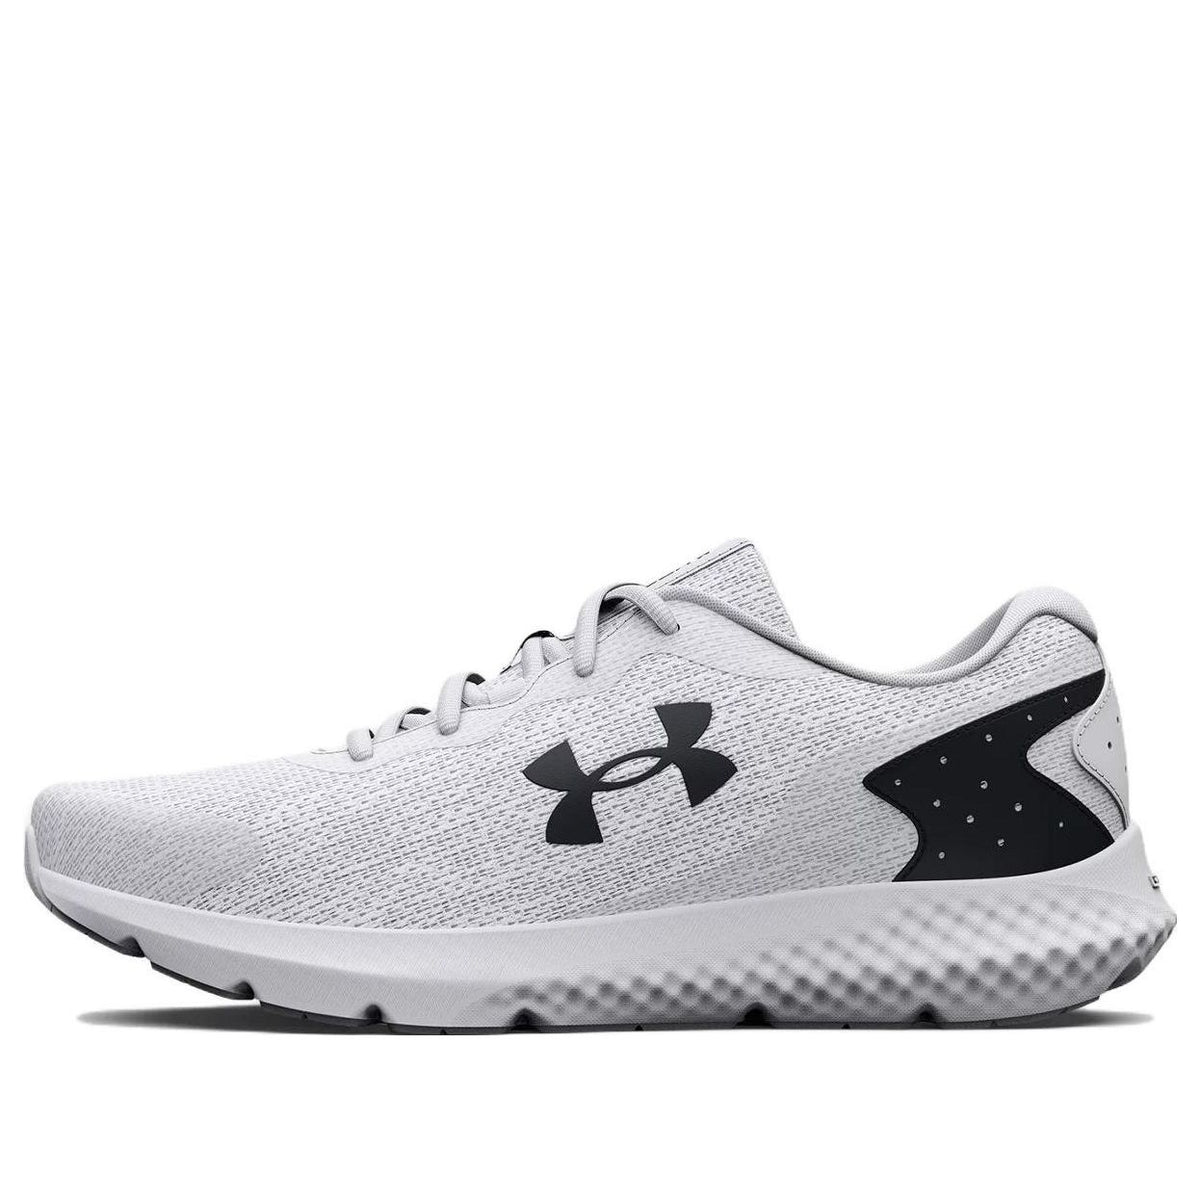 Under Armour Charged Rogue 3 Knit 3026140-103 Running Athletic Shoes Mens  New